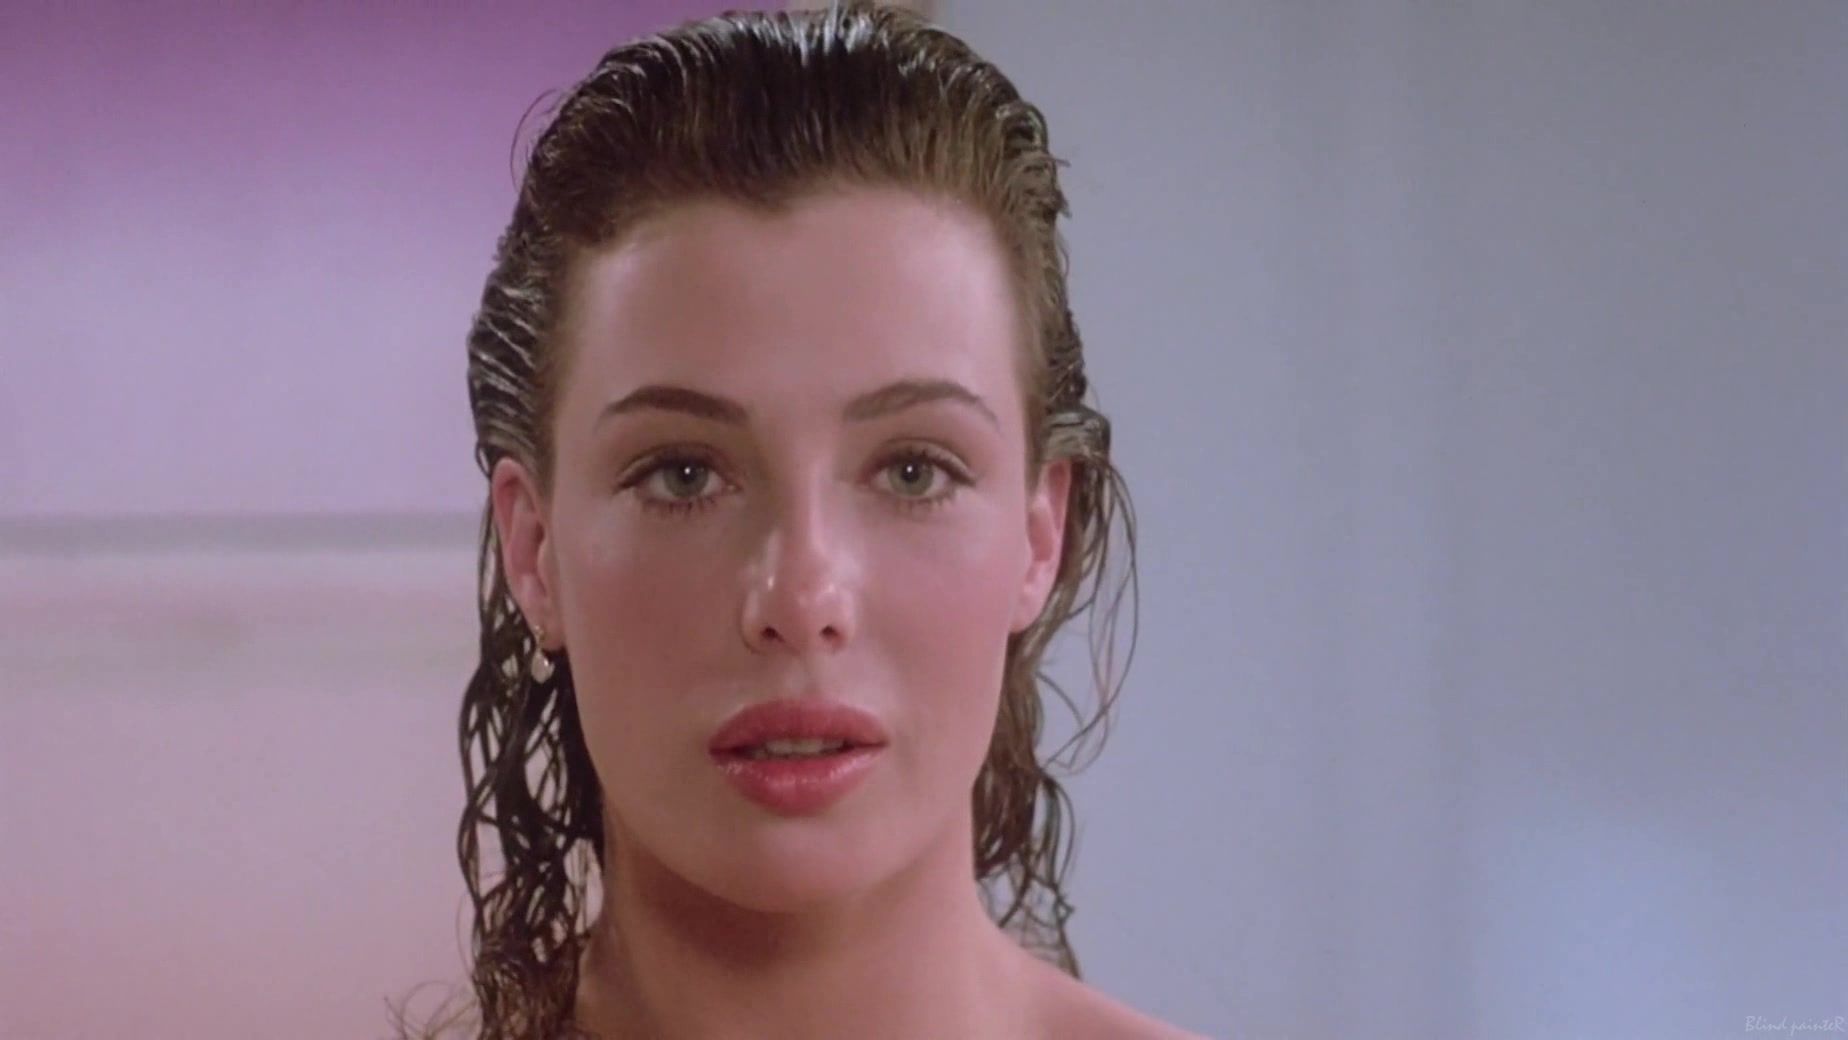 HBrowse Kelly LeBrock nude - The Woman in Red (1984) Shameless - 2